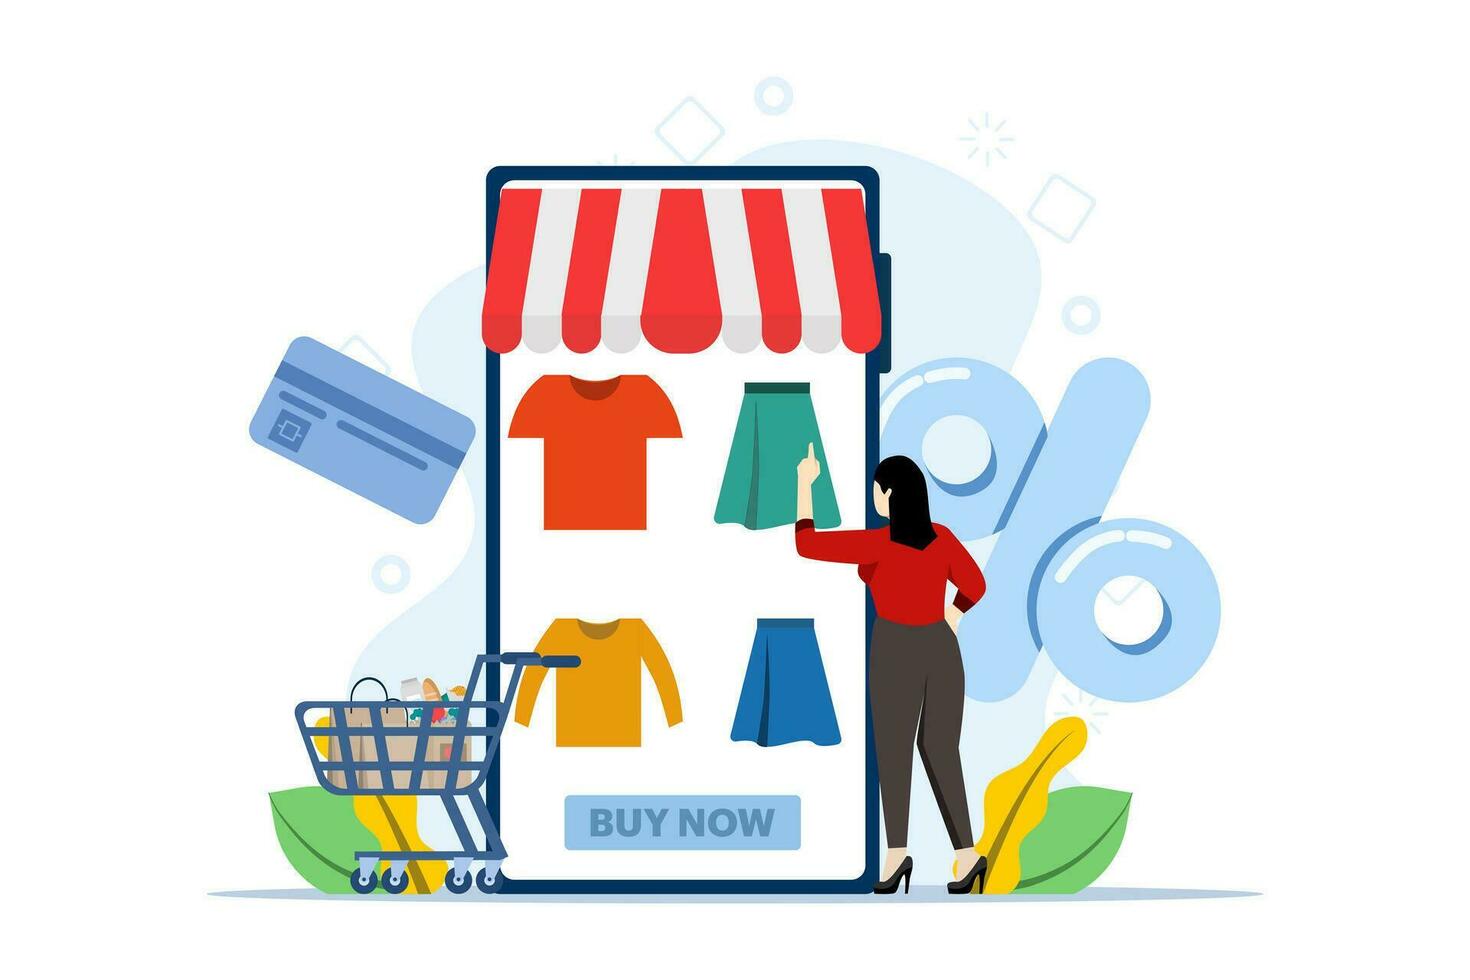 concept of online shopping, e-commerce, flash sale, discount, cashless payment, digital, people doing online shopping transactions, smartphones and credit cards doing online shopping. vector